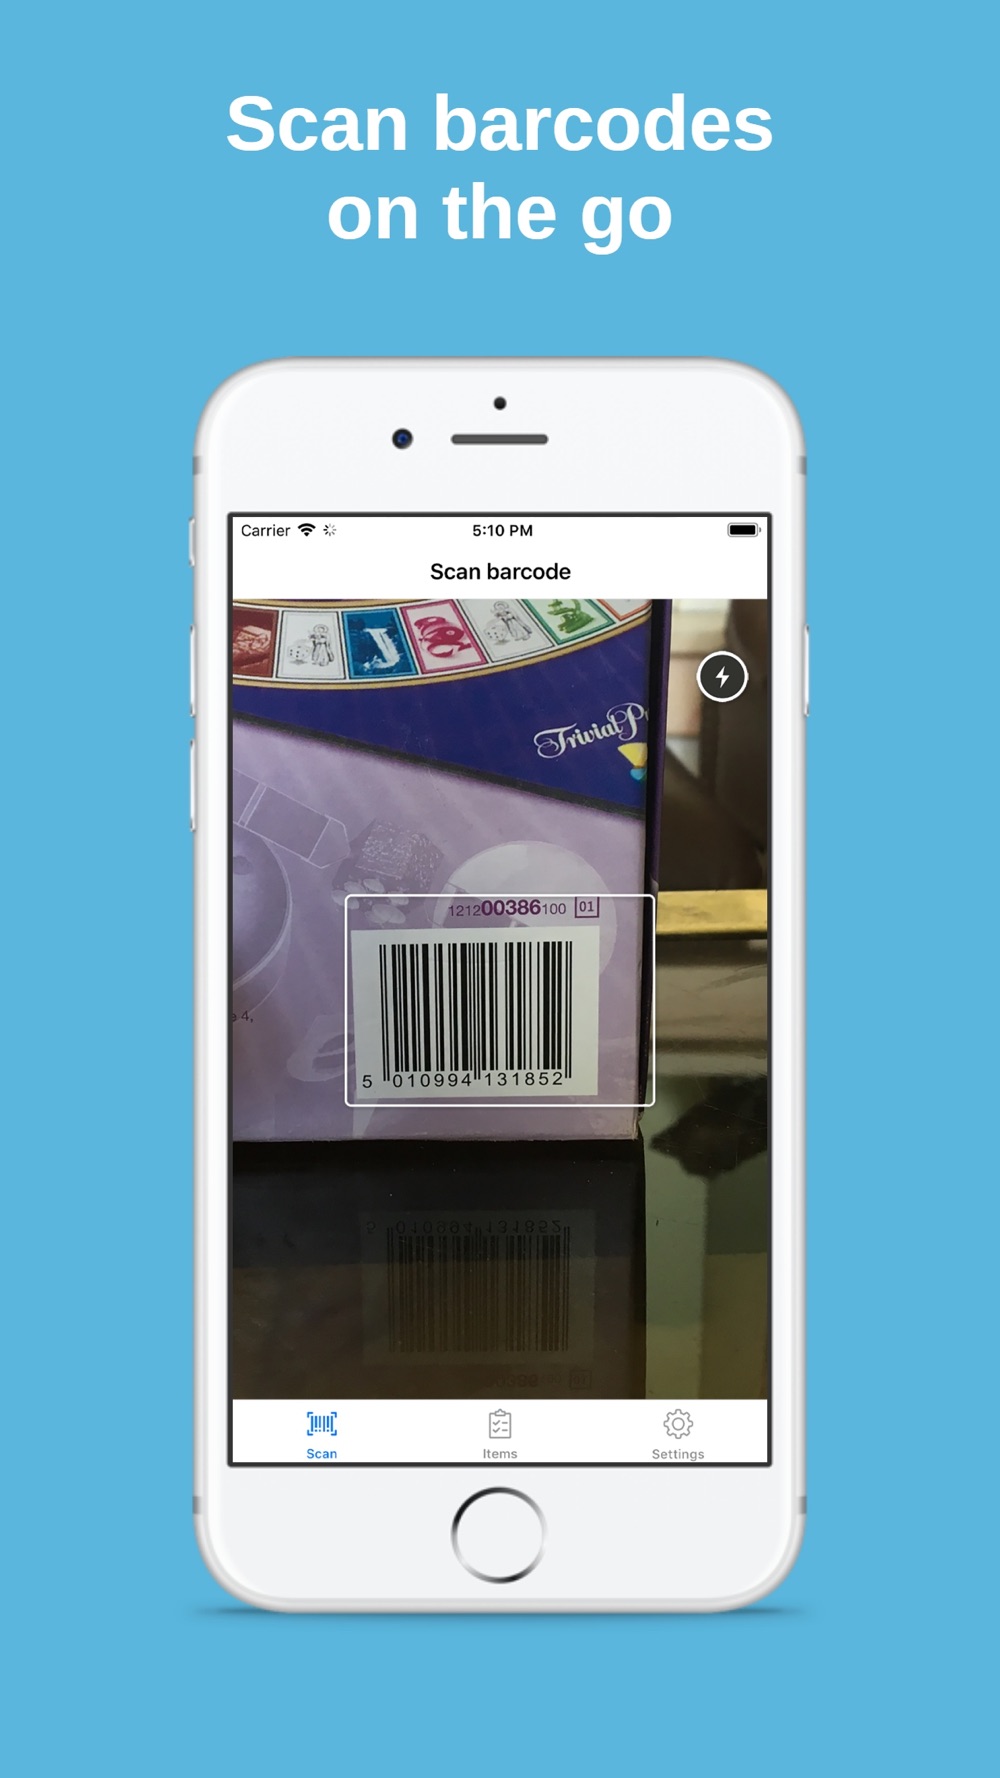 Barcode Scanner for Amazon Free Download App for iPhone - STEPrimo.com